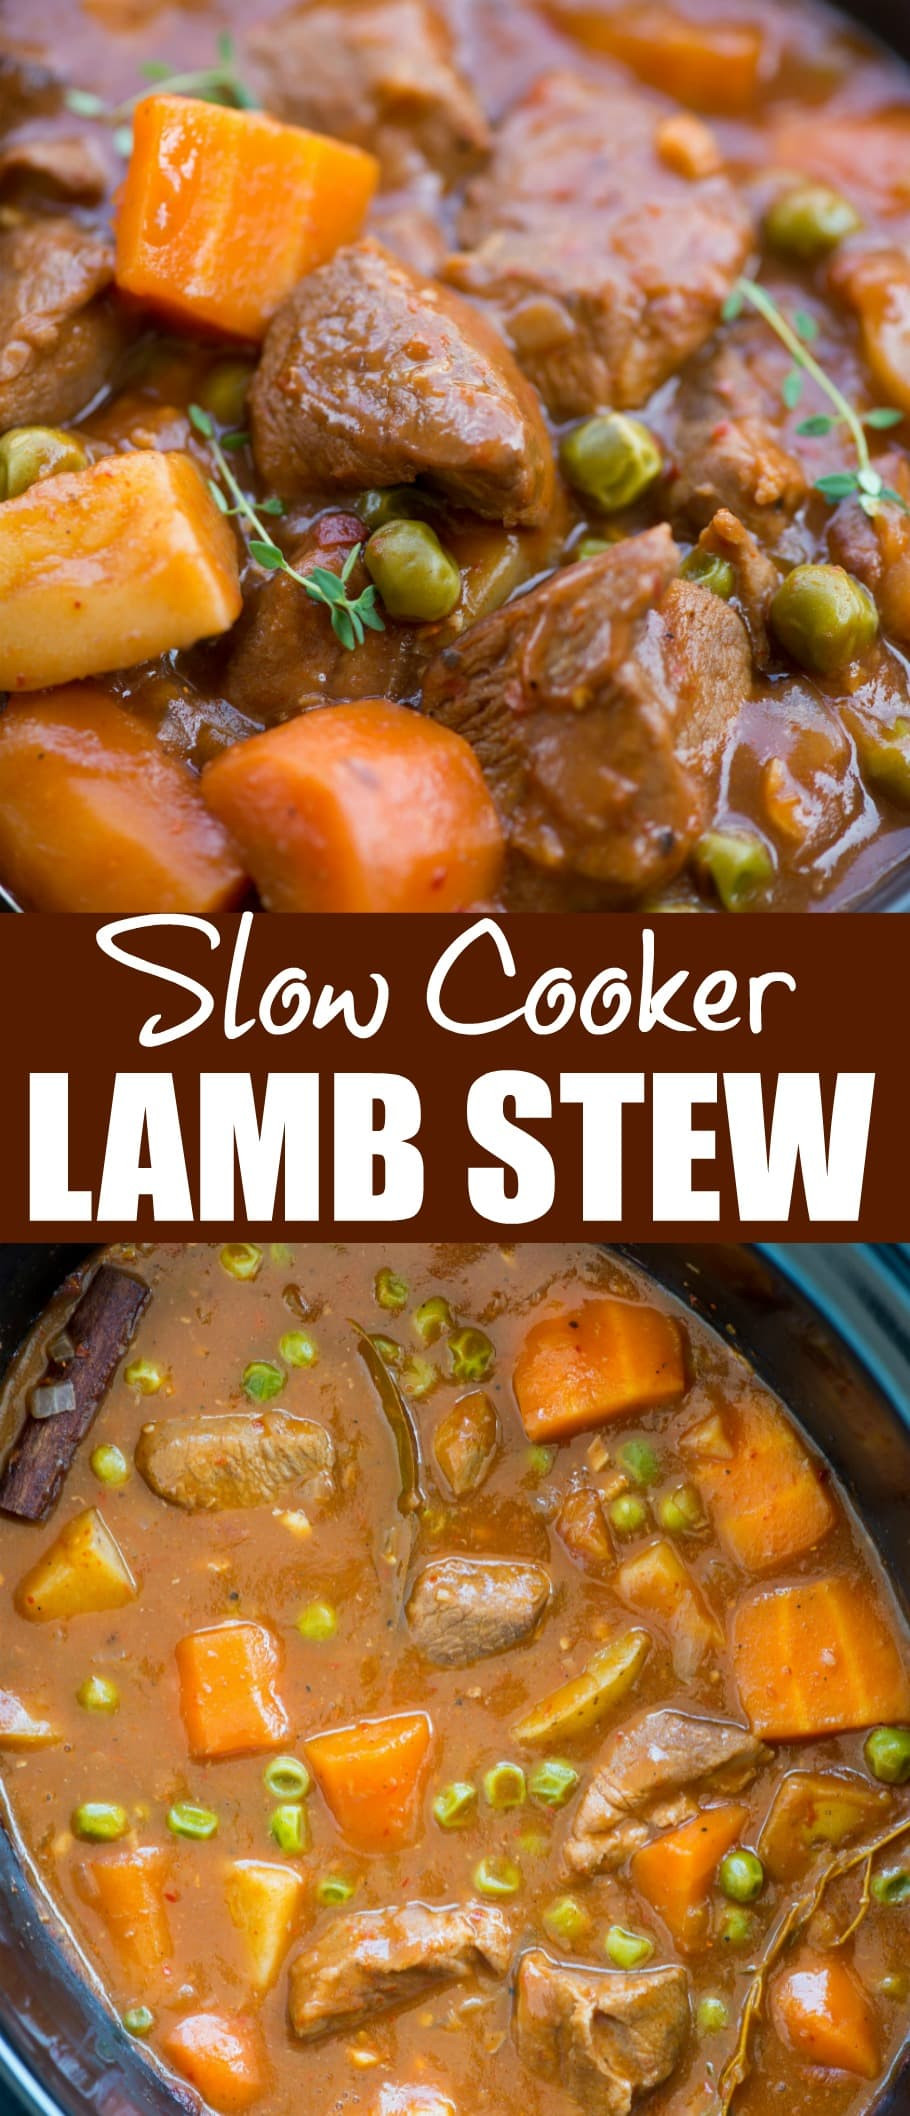 Lamb Stew Slow Cooker Recipe
 SLOW COOKER LAMB STEW The flavours of kitchen